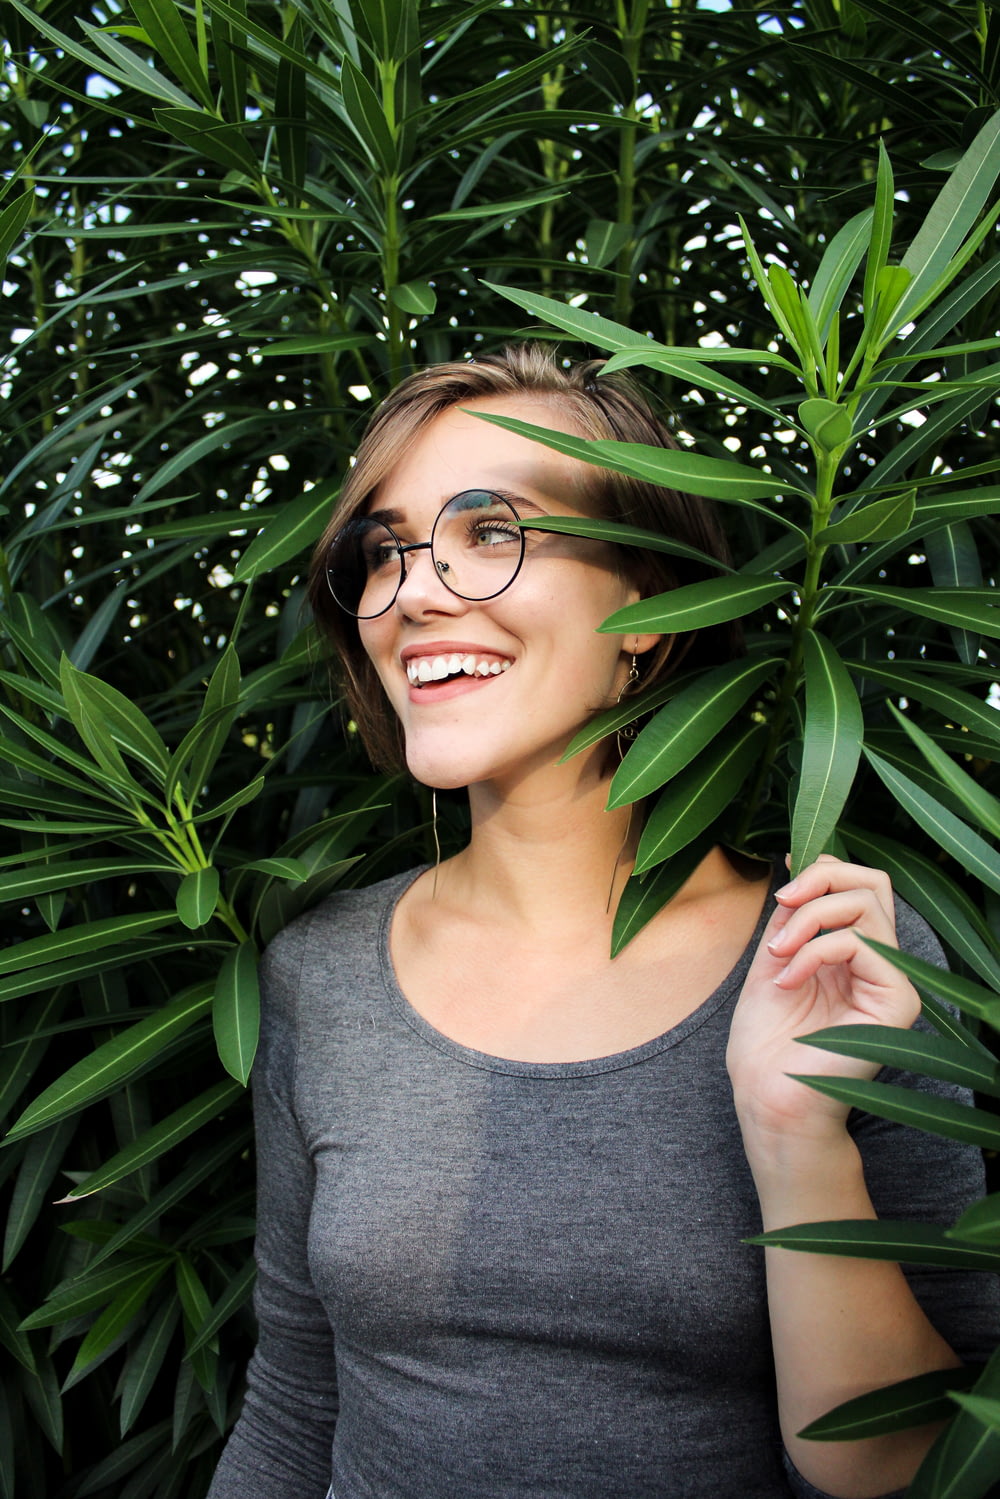 woman holding a green-leafed plant smiling during daytime